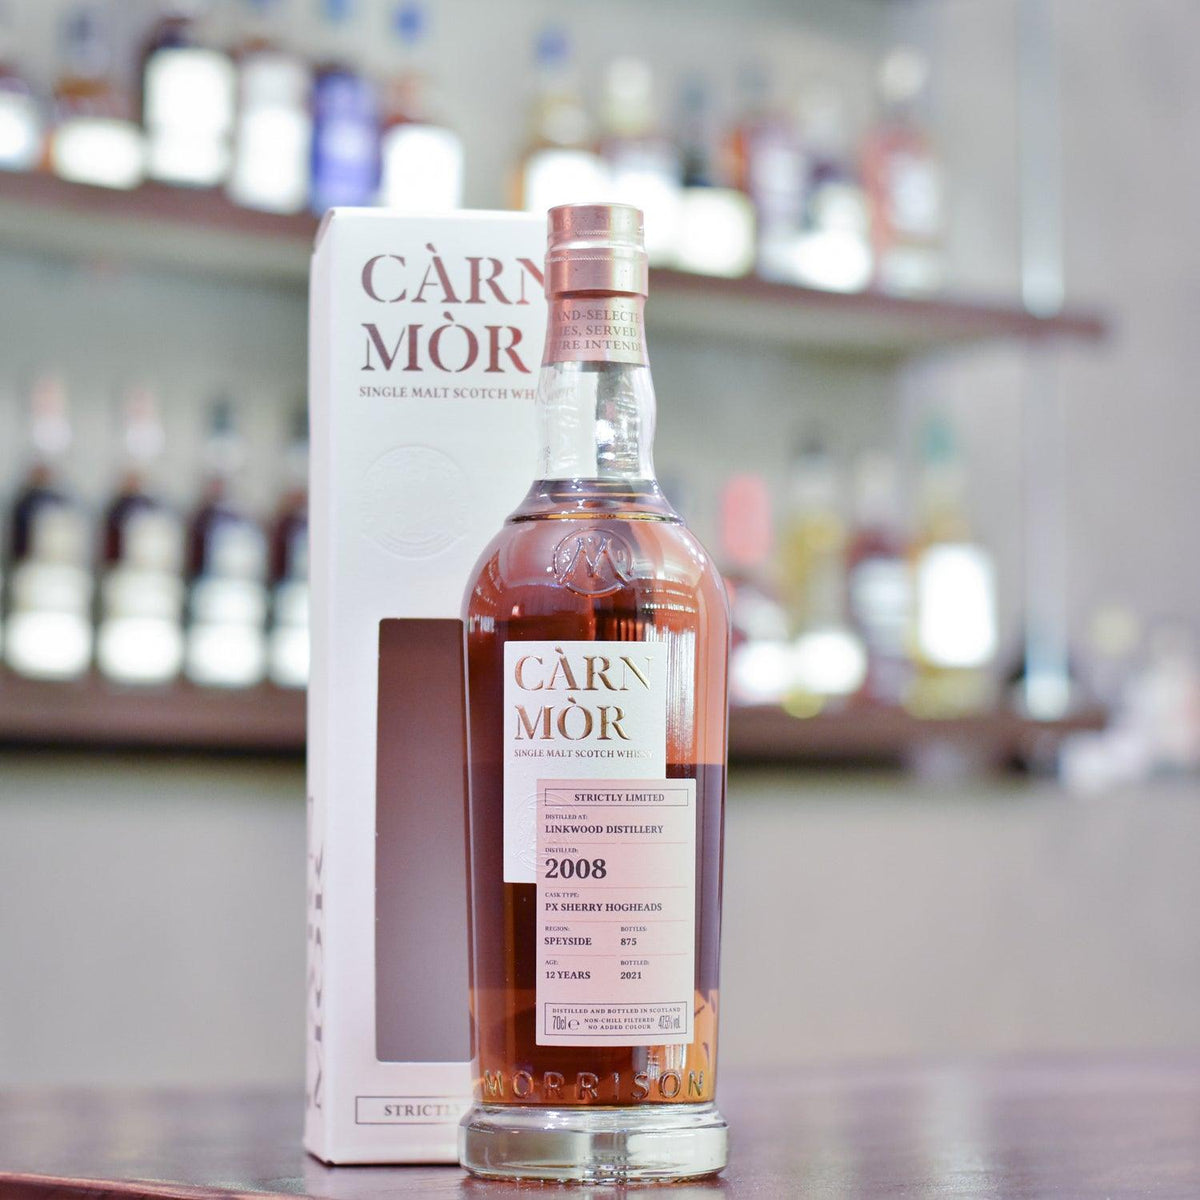 Carn Mor - Linkwood 12 Year Old 2008 Strictly Limited Edition - The Rare Malt